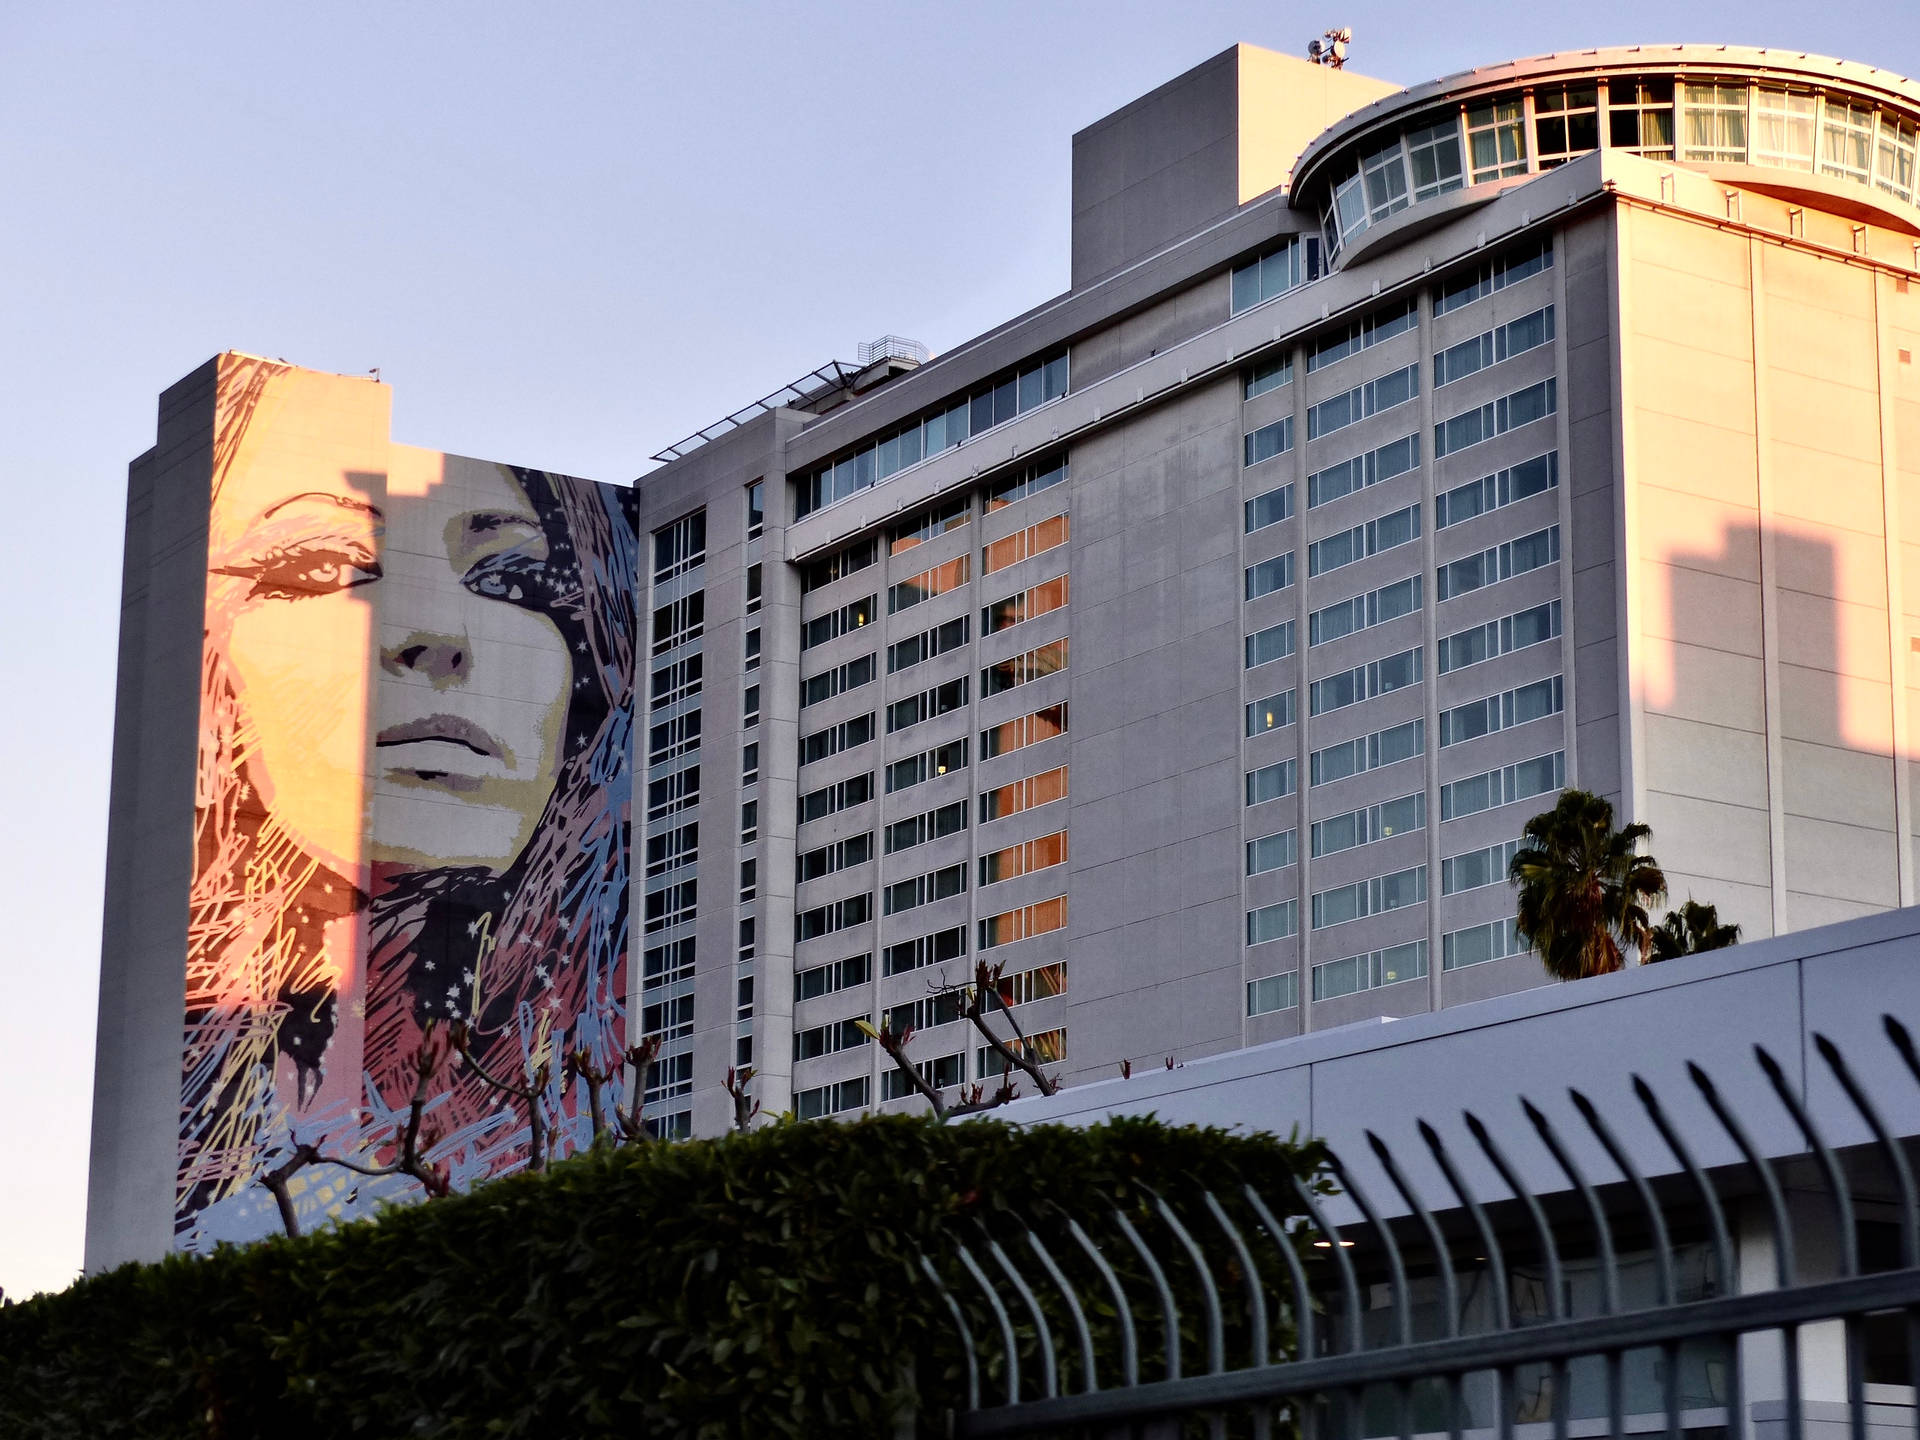 Hollywood Street Building Mural Background